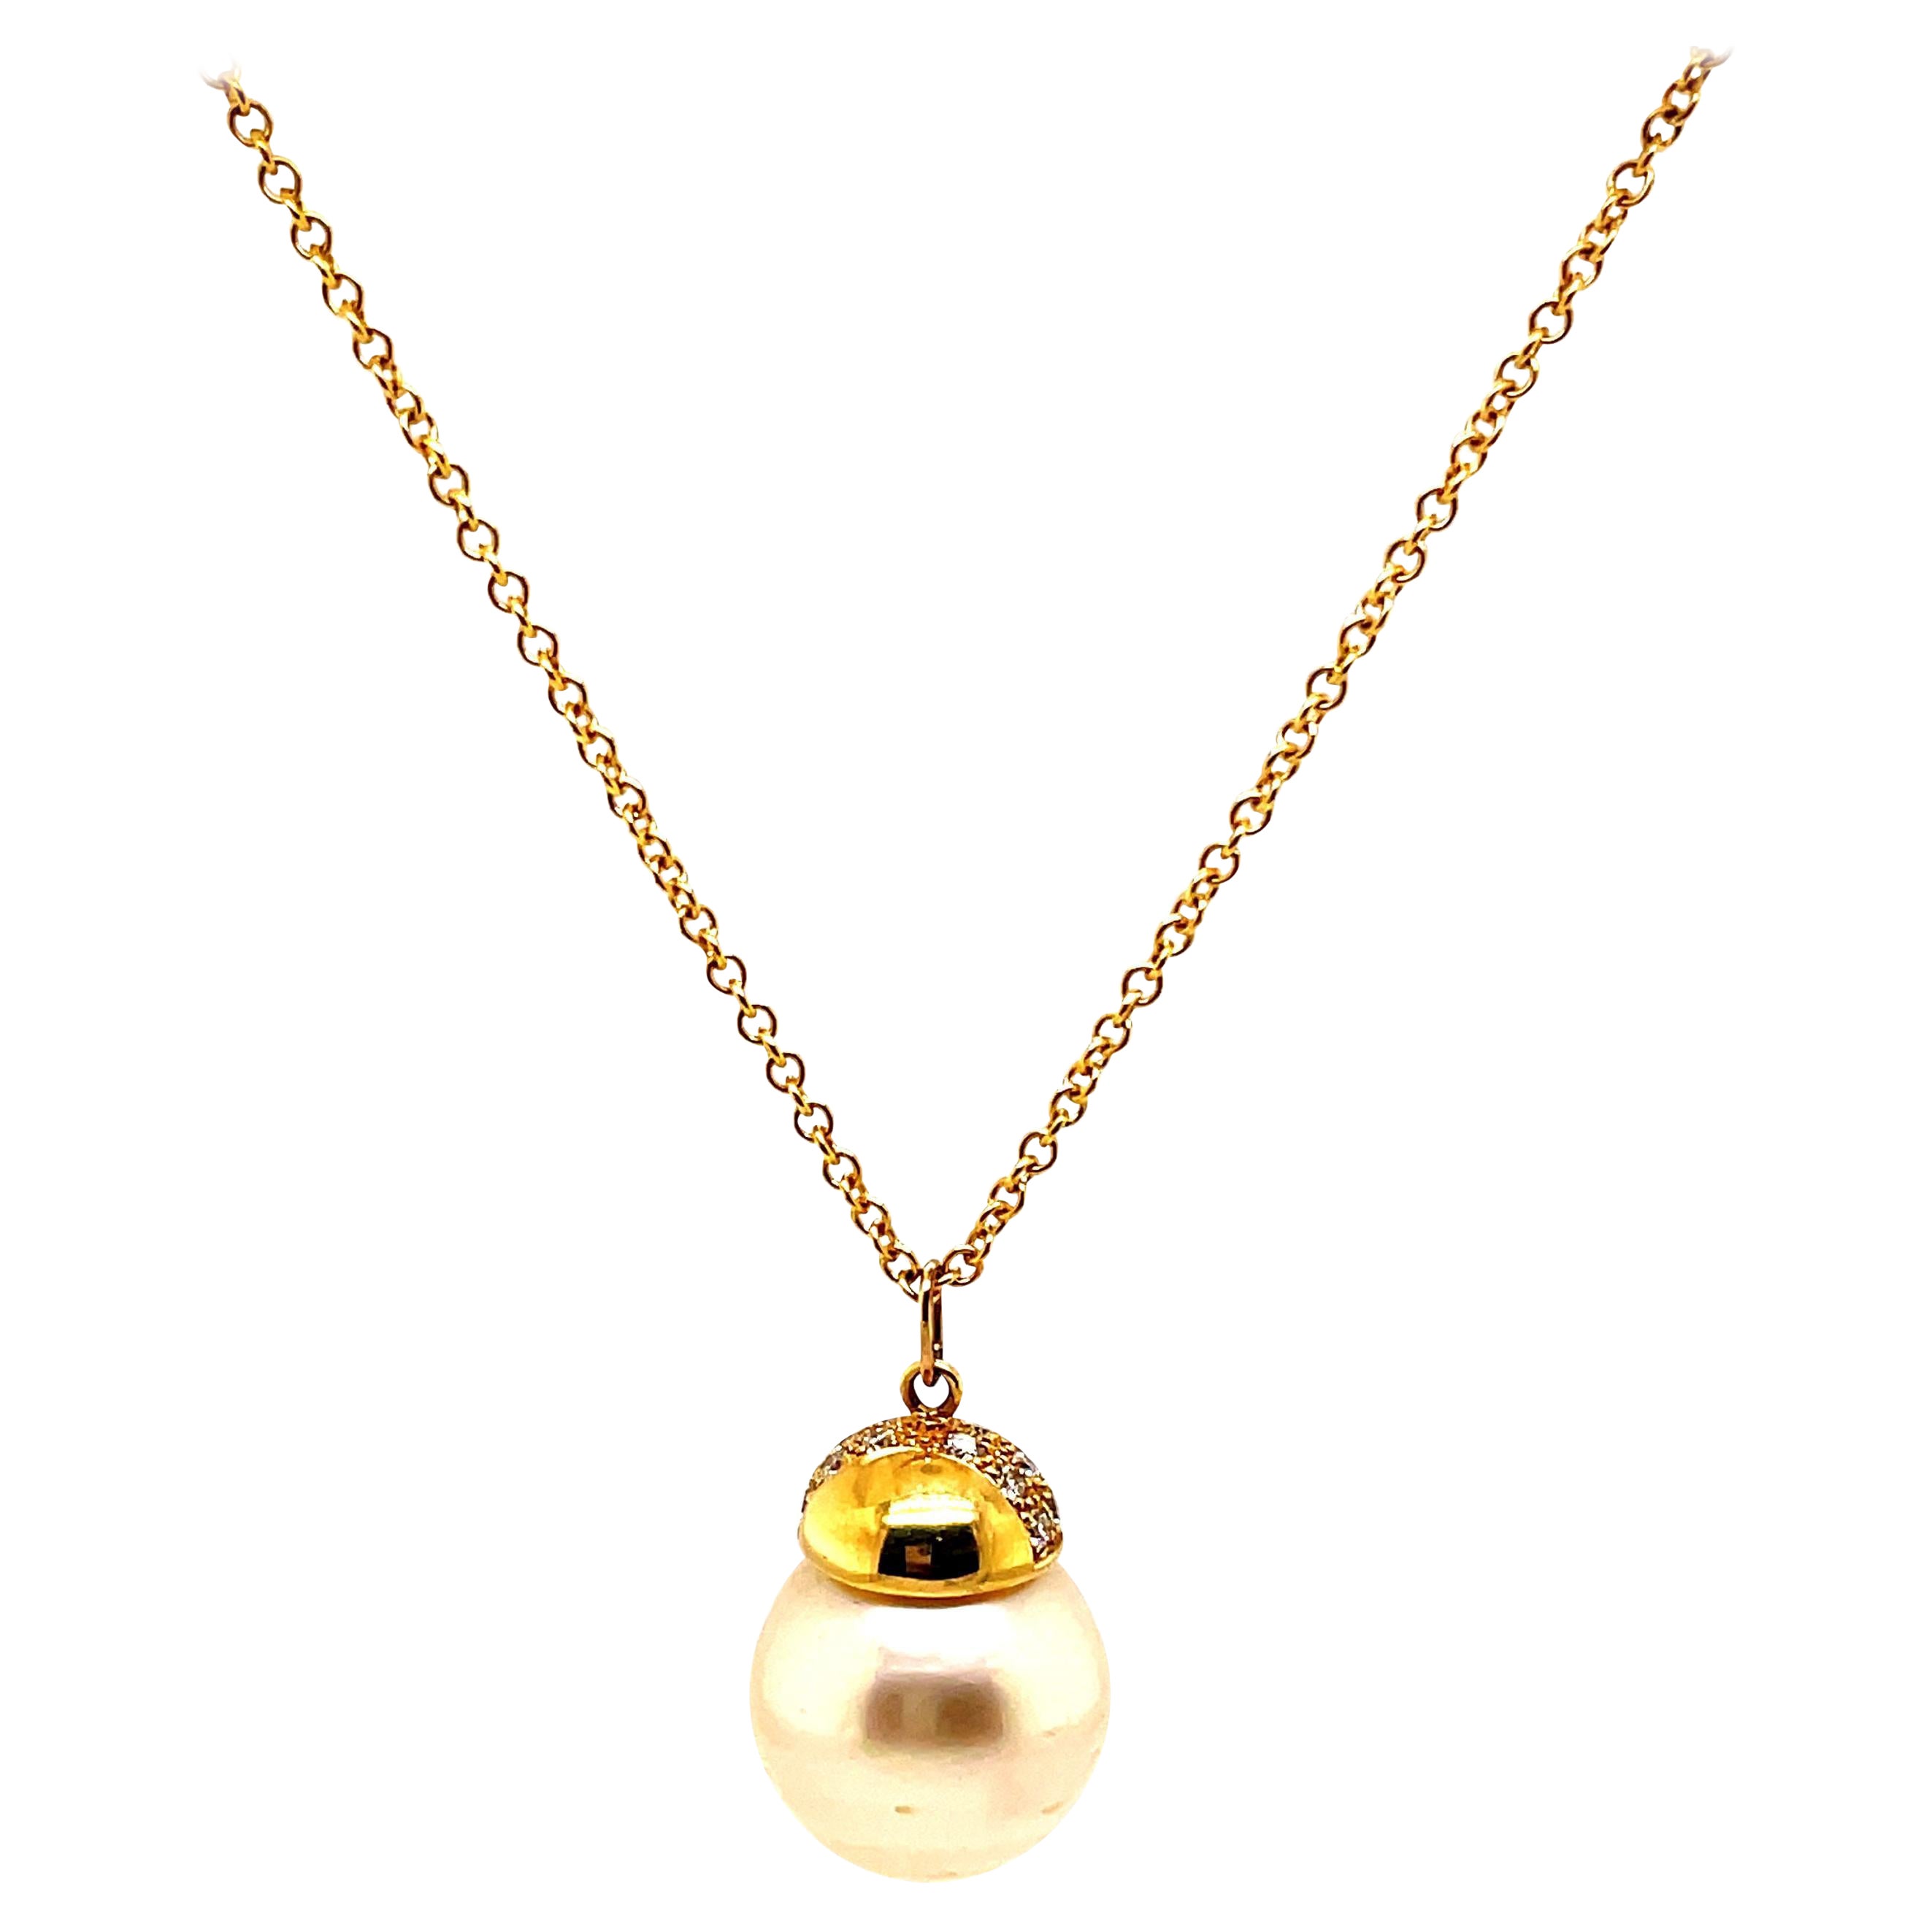 Pear and Diamond Pendant Necklace 18k Yellow Gold